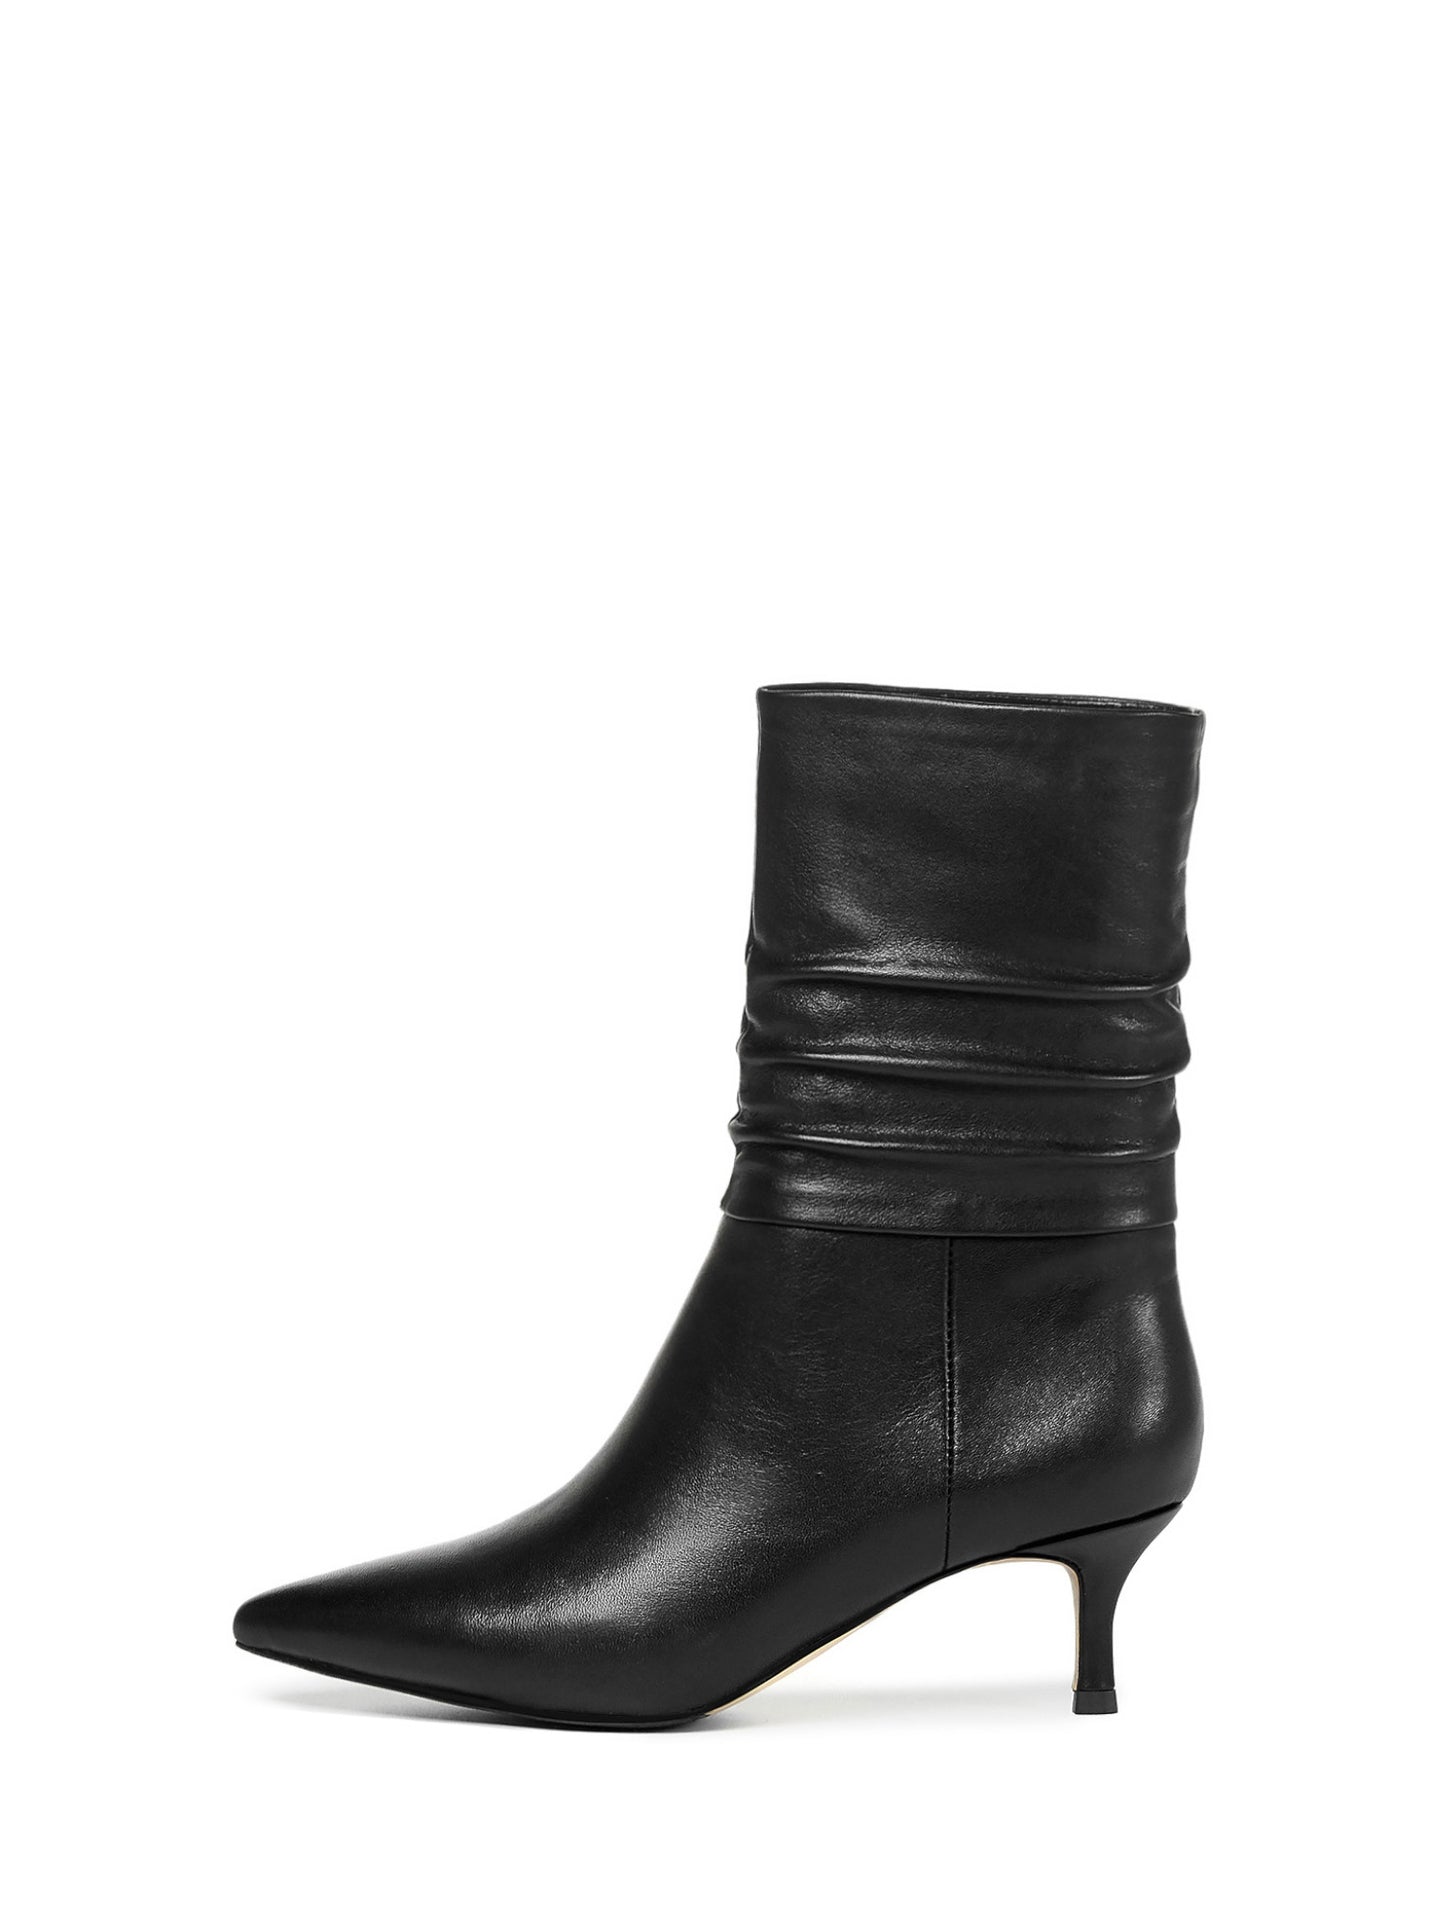 ROLISA-Milo-Slouchy-Ruched-Leather-Kitten-Heels-Mid-Calf-Boots-Black-1